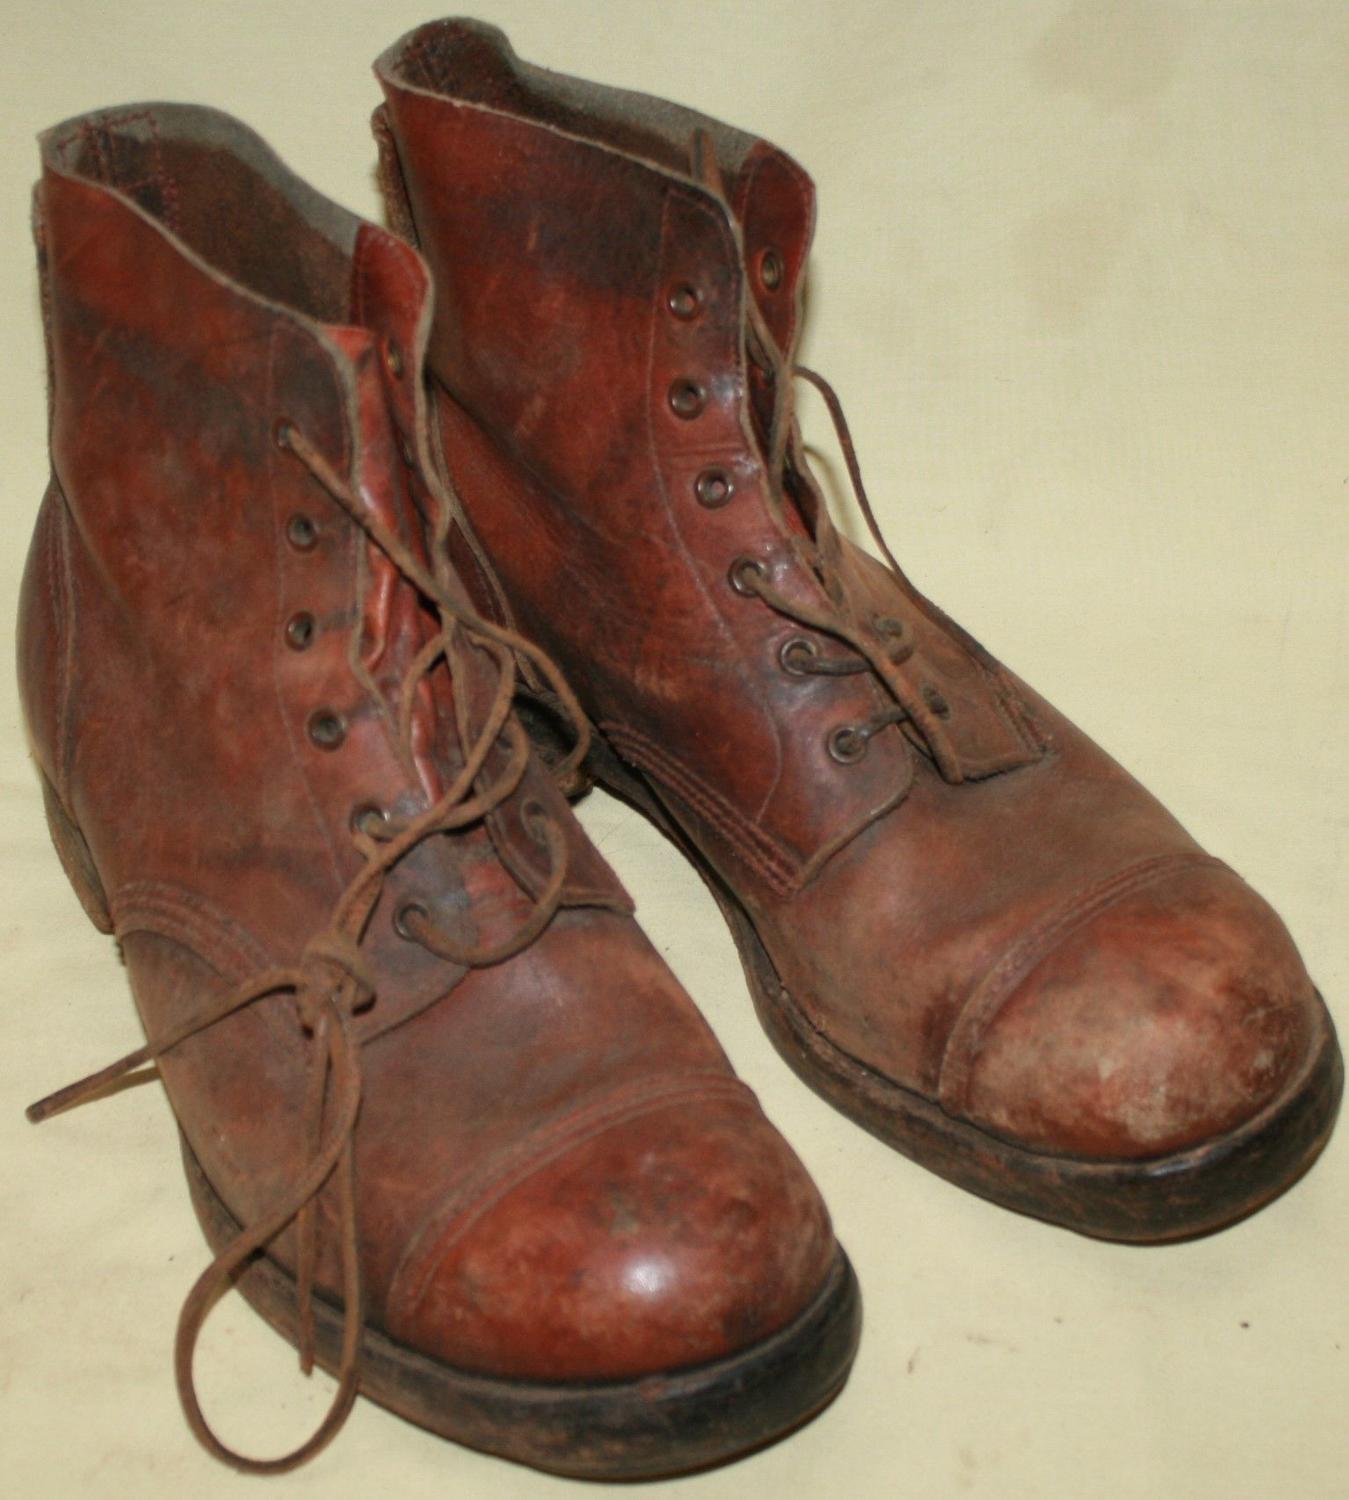 A GOOD USED PAIR OF 1944 DATED JUNGLE BOOTS SIZE 9 M